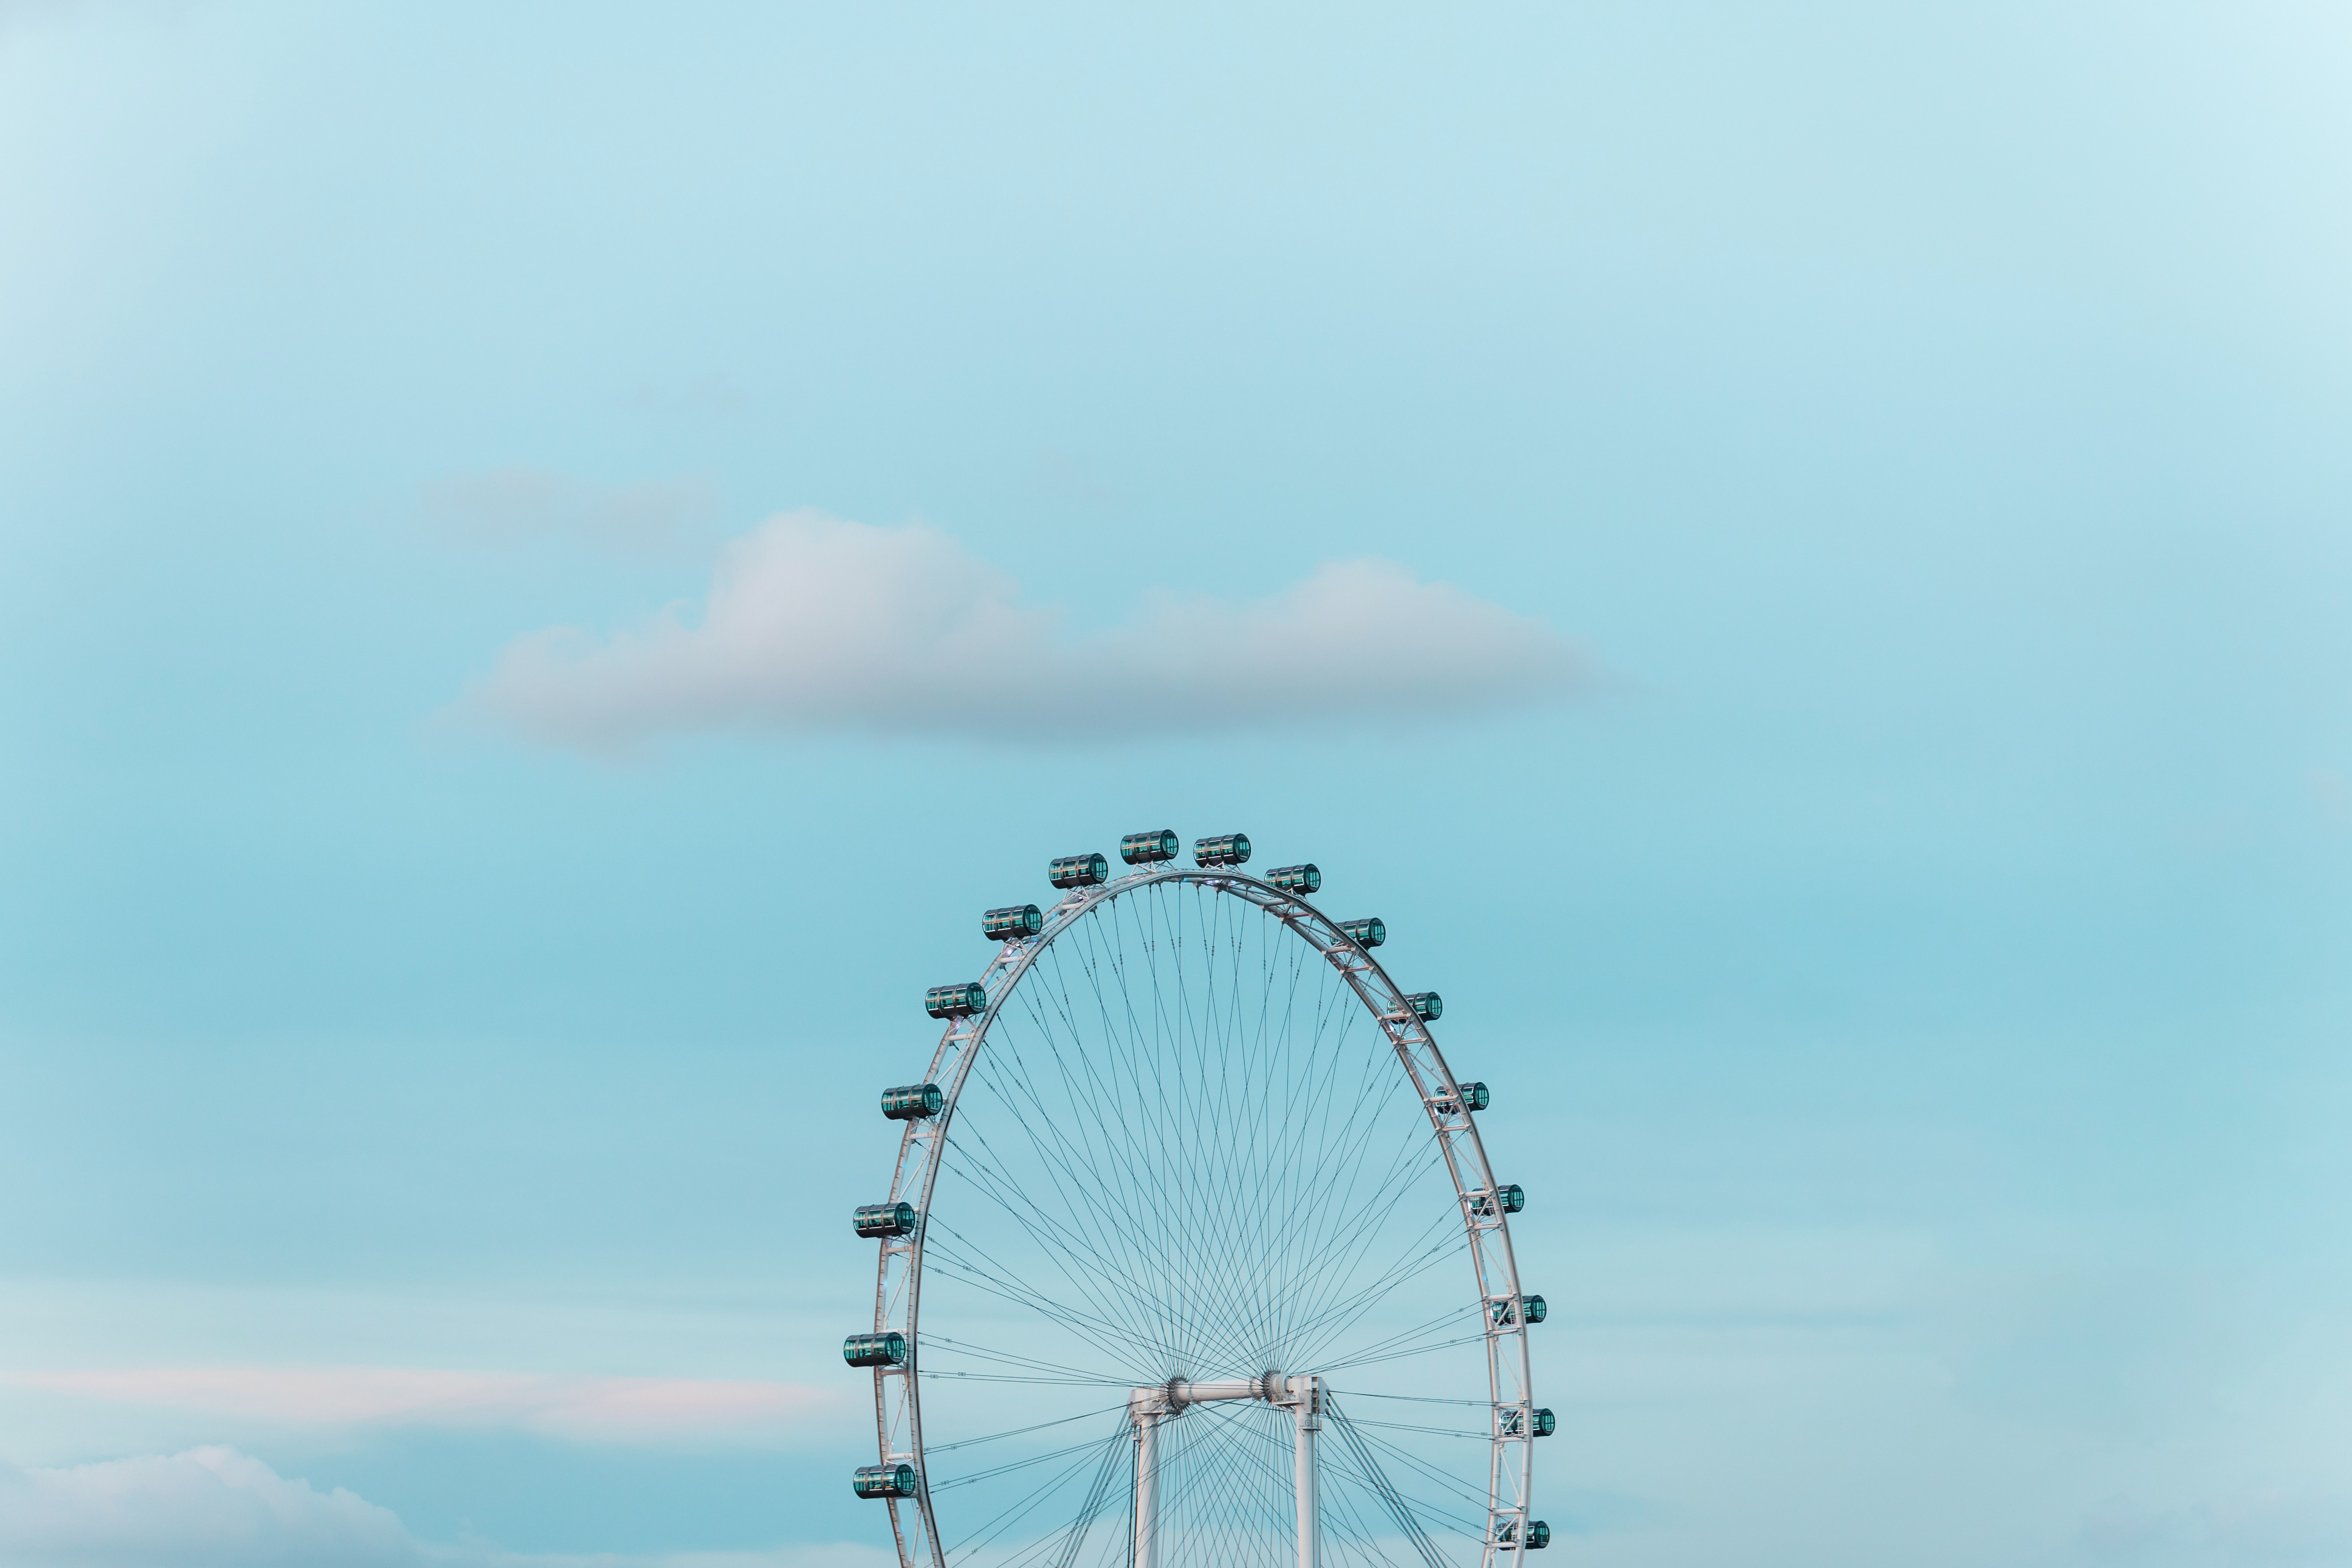 sky, miscellanea, miscellaneous, ferris wheel, attraction, booths, stall lock screen backgrounds